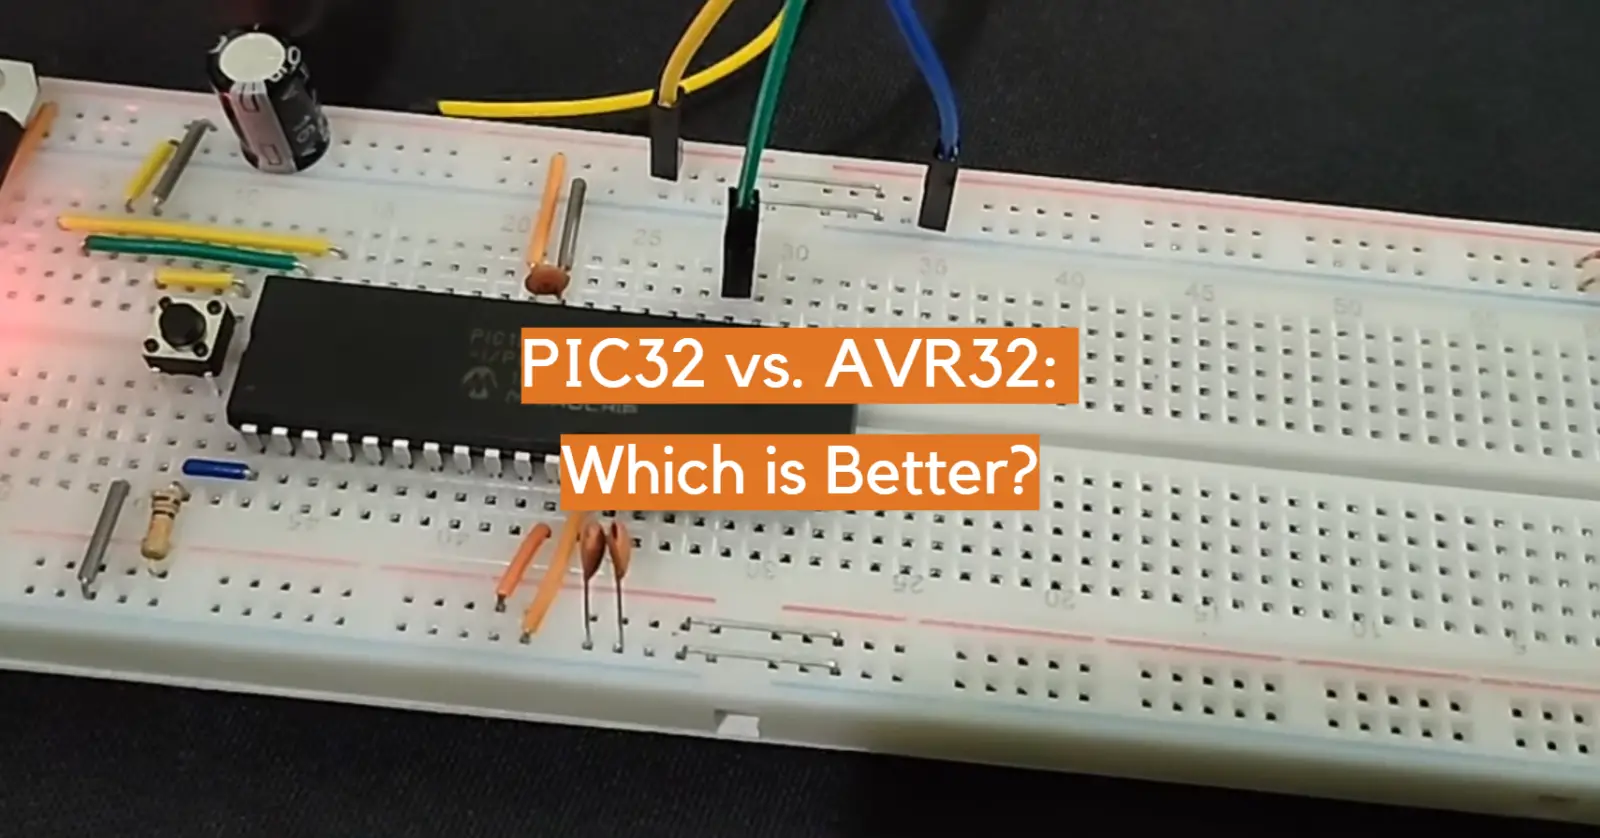 PIC32 vs. AVR32: Which is Better?